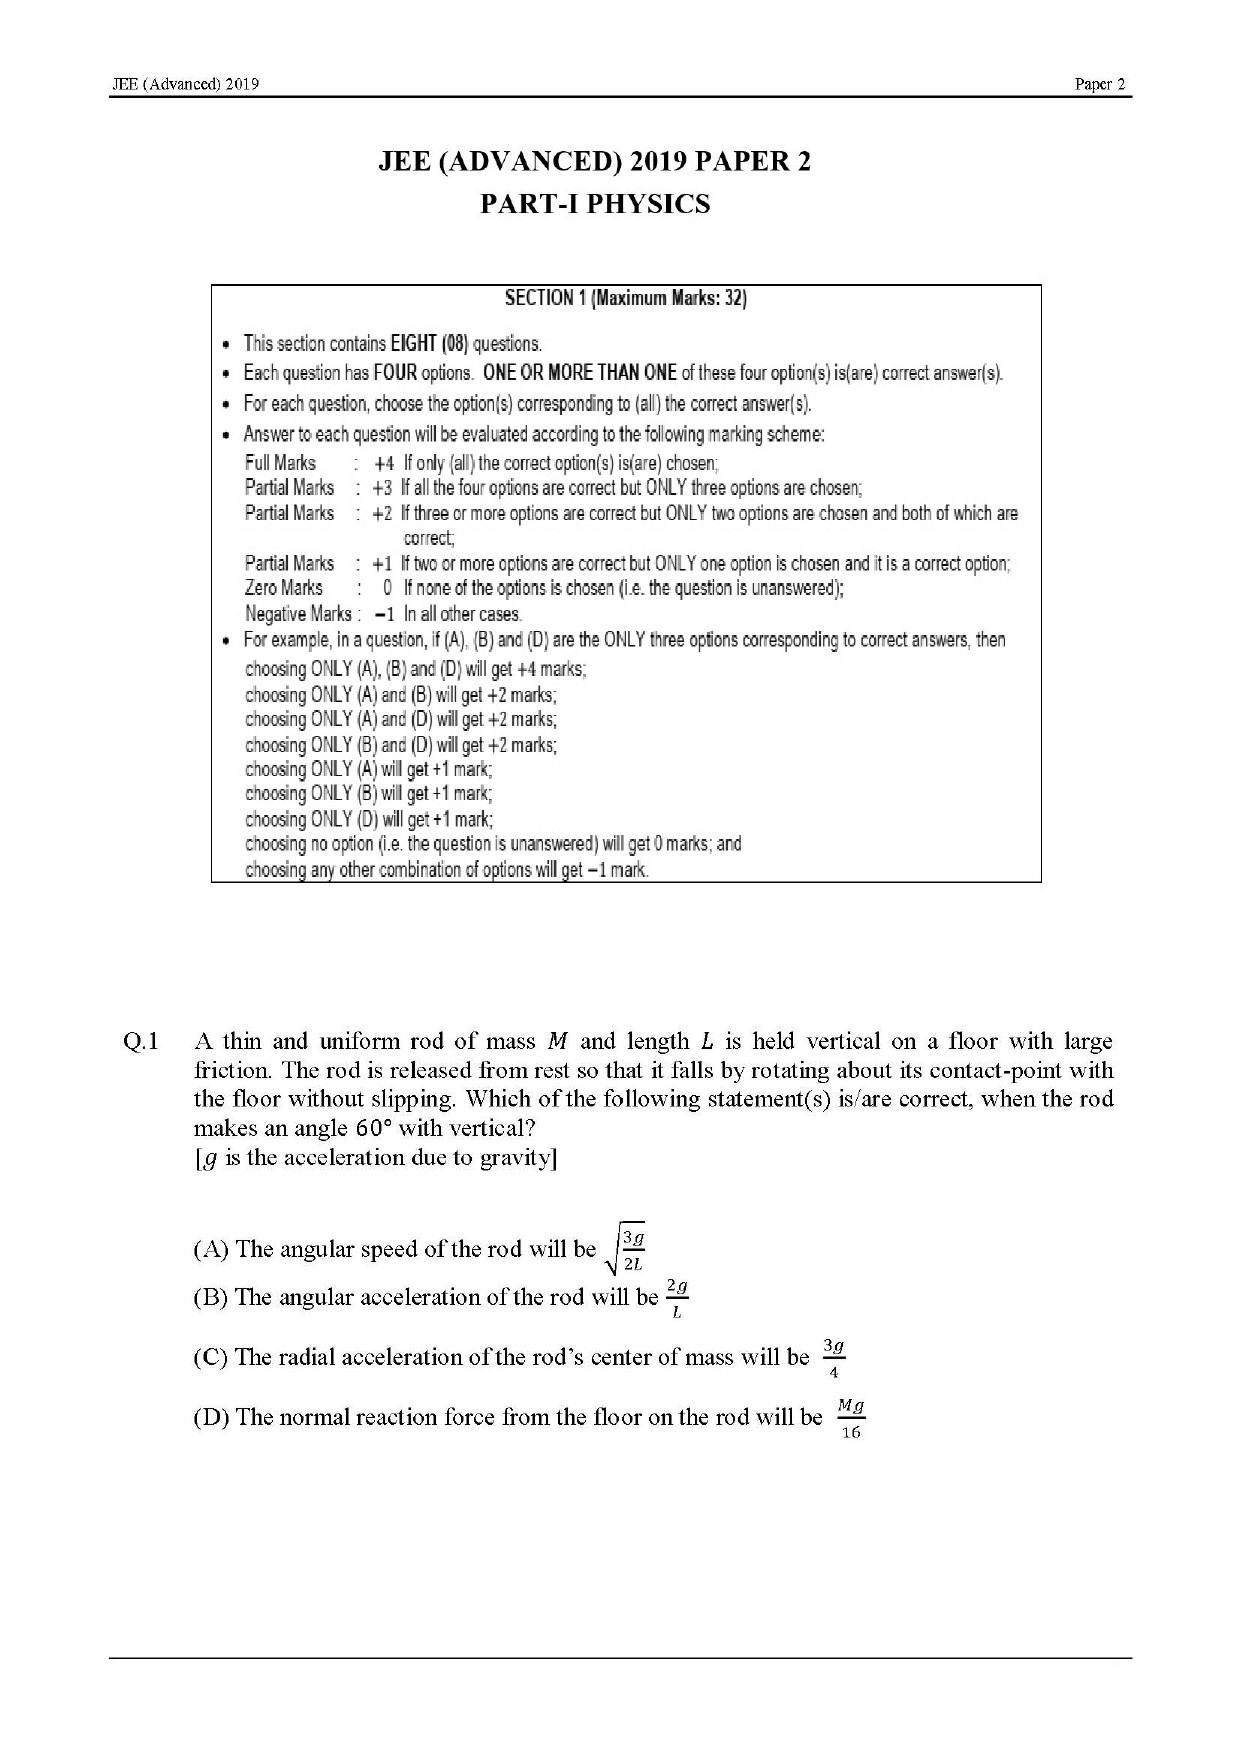 JEE Advanced English Question Paper 2019 Paper 2 Physics 1